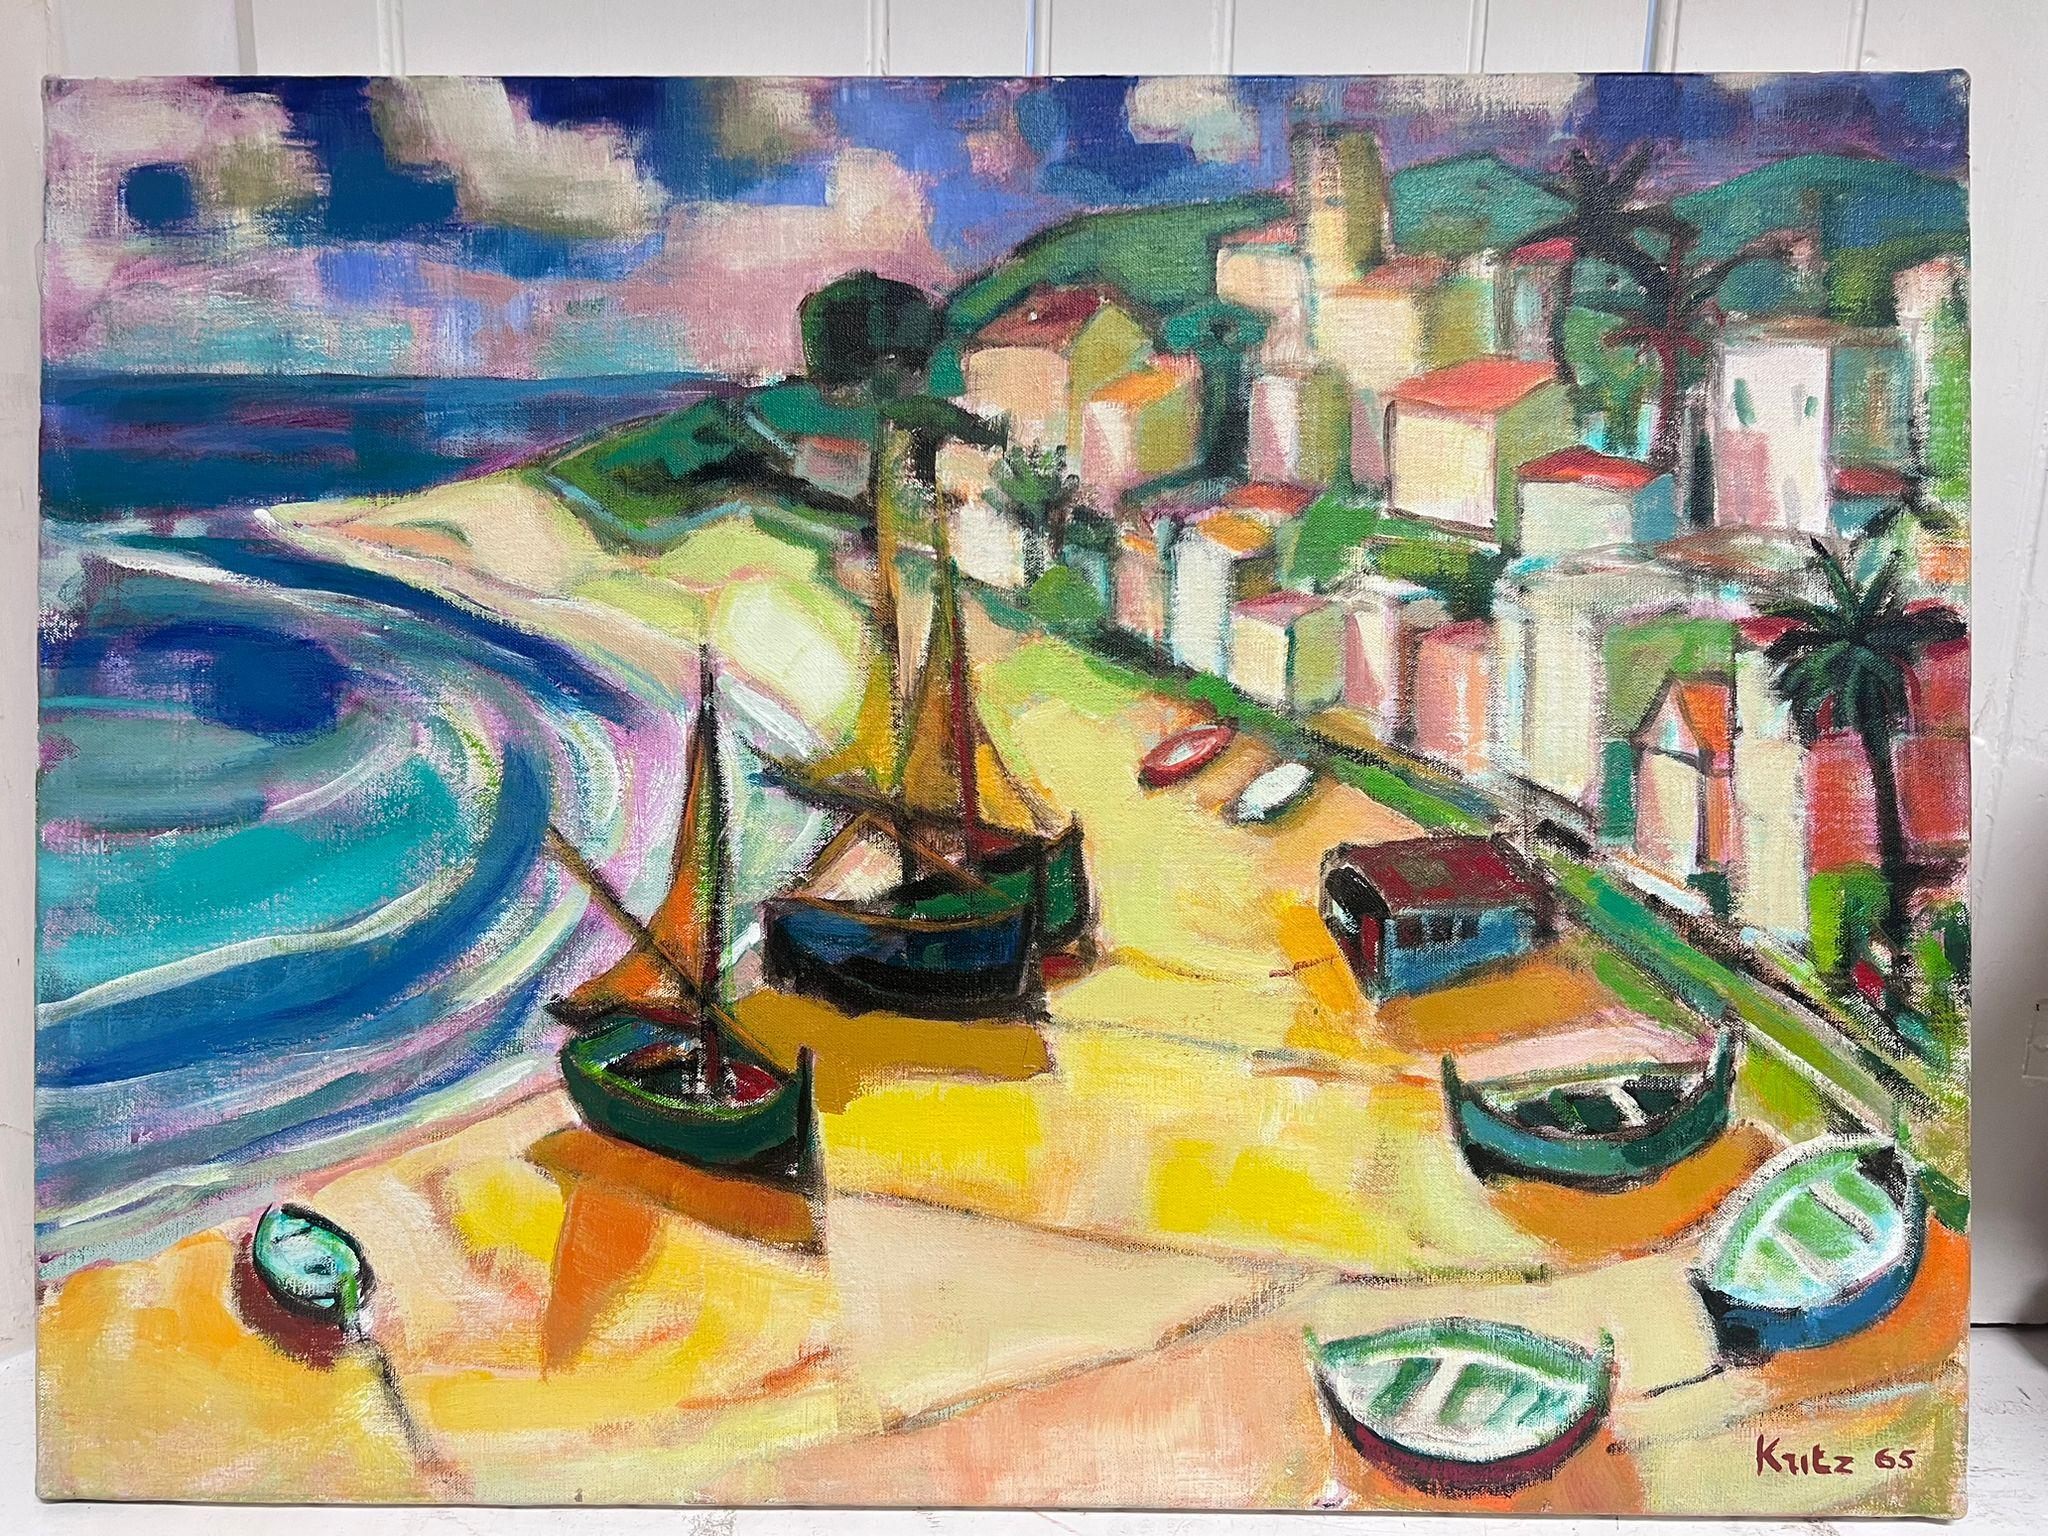 The French Coastline and Beach
by Michel Kritz (French 1925-1994)
signed / dated 65'
signed oil on canvas, unframed
canvas: 24 x 32 inches
provenance: private collection, France
condition: very good and sound condition  